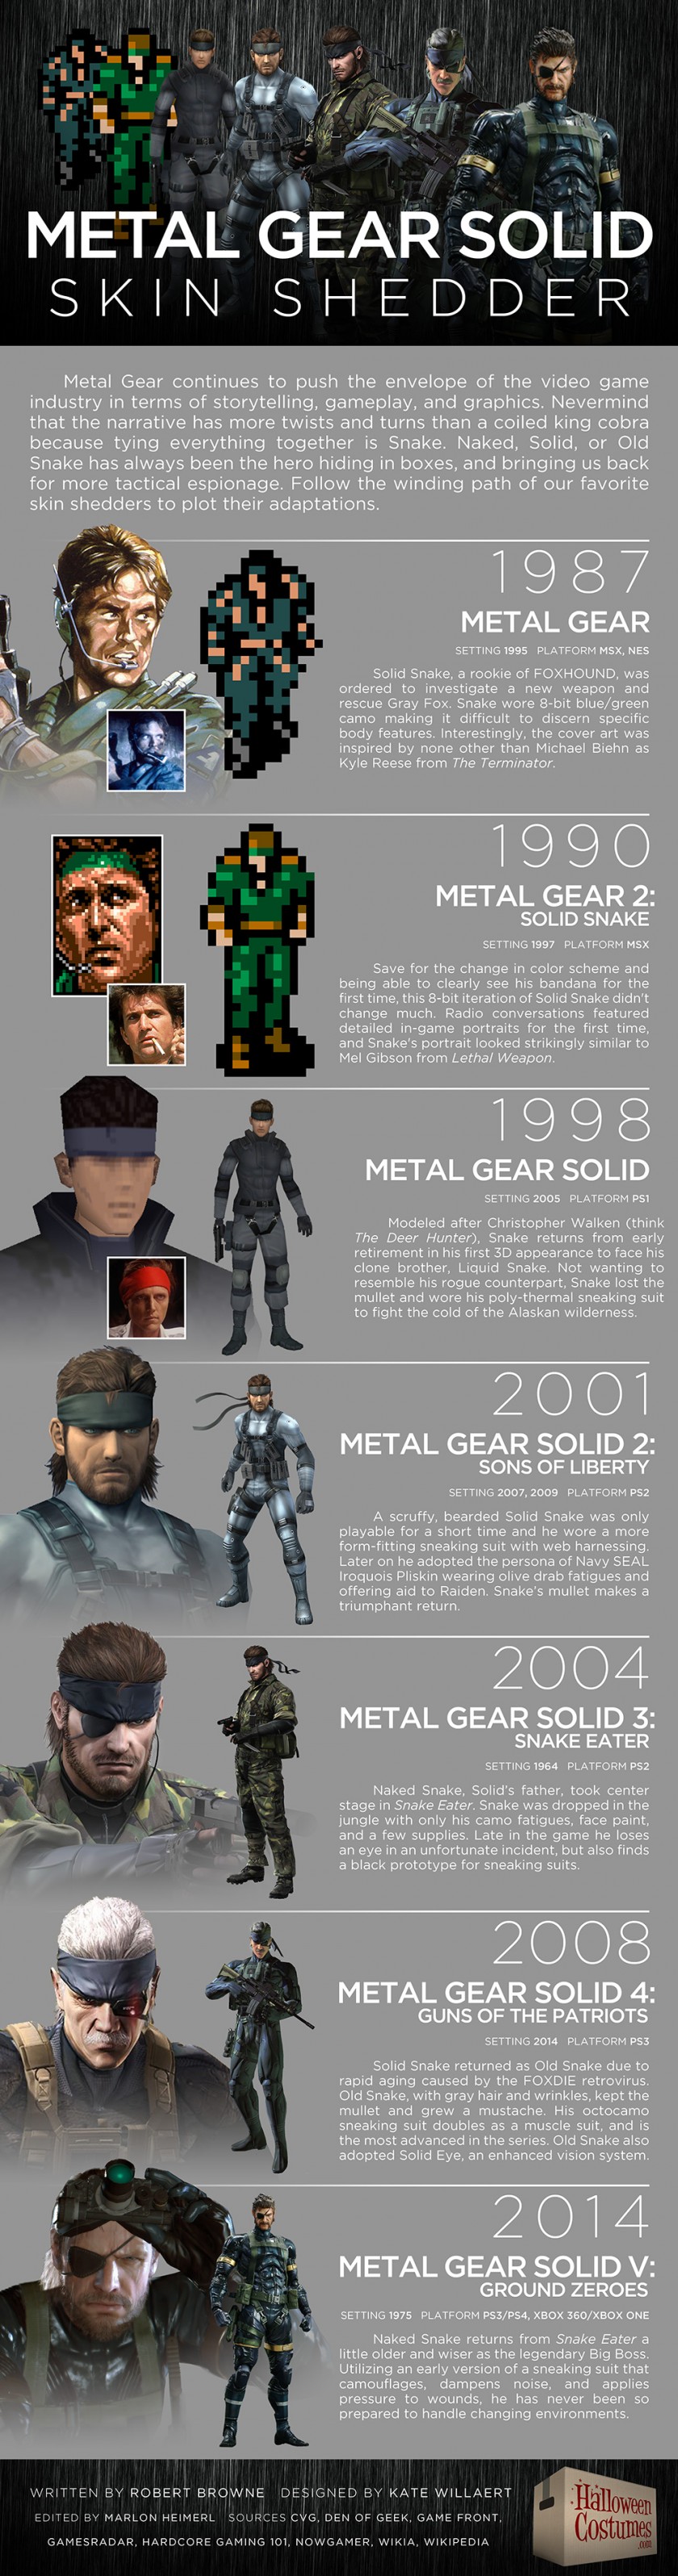 Metal Gear Solid - Infographic